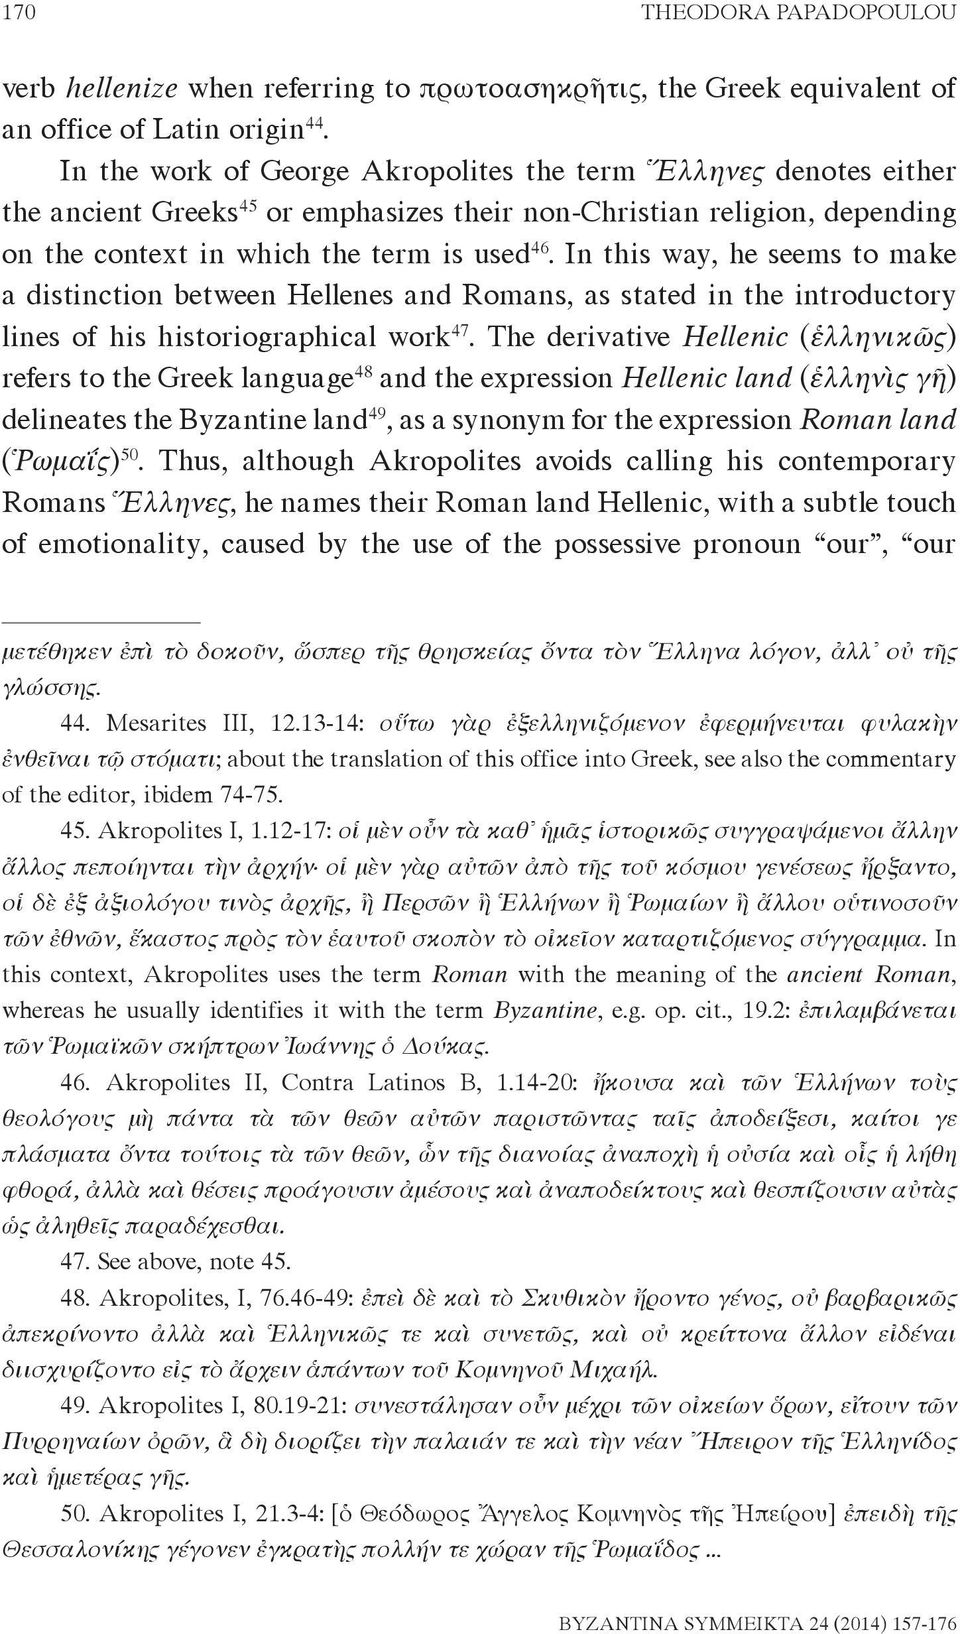 In this way, he seems to make a distinction between Hellenes and Romans, as stated in the introductory lines of his historiographical work 47.